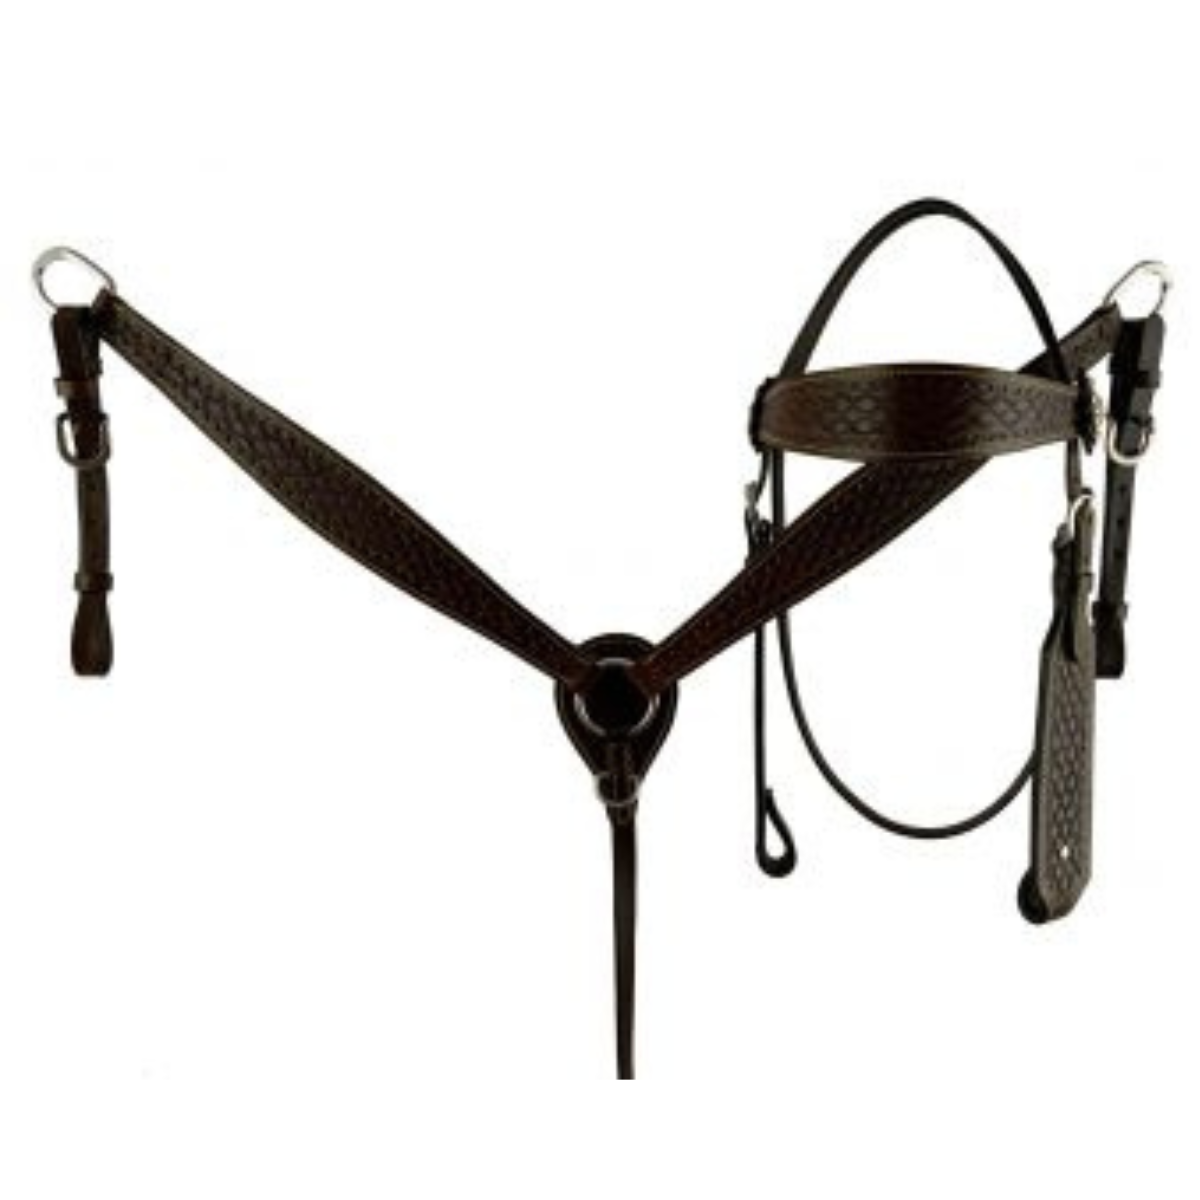 12" DOUBLE T  DARK OIL  YOUTH PLEASURE STYLE SADDLE SET WITH HARD SEAT - Double T Saddles